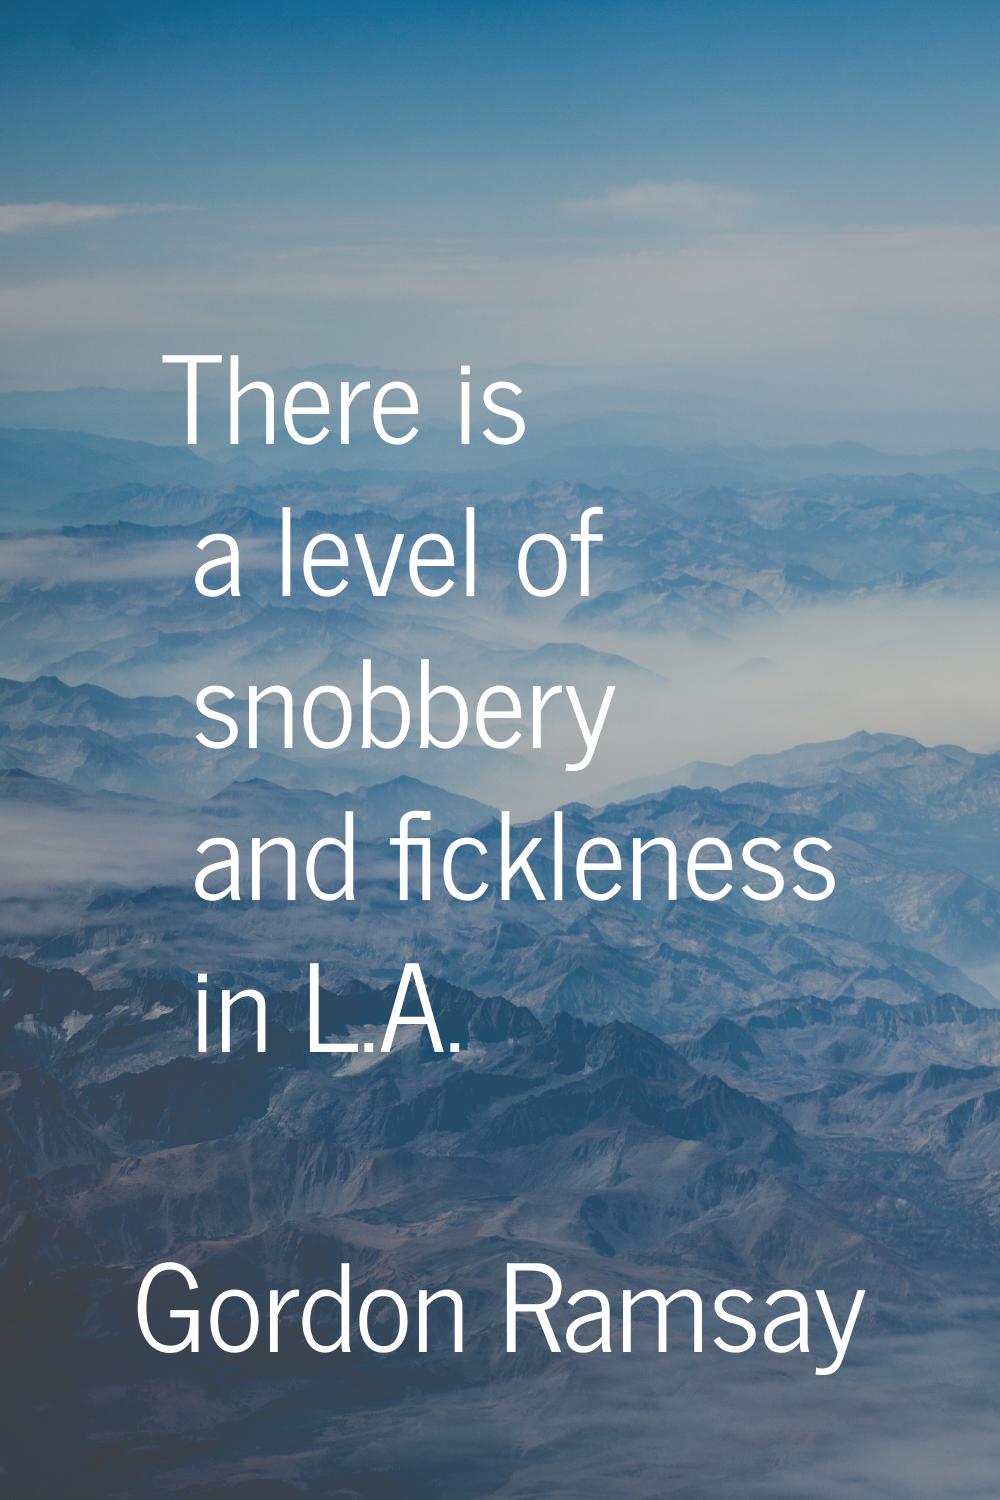 There is a level of snobbery and fickleness in L.A.